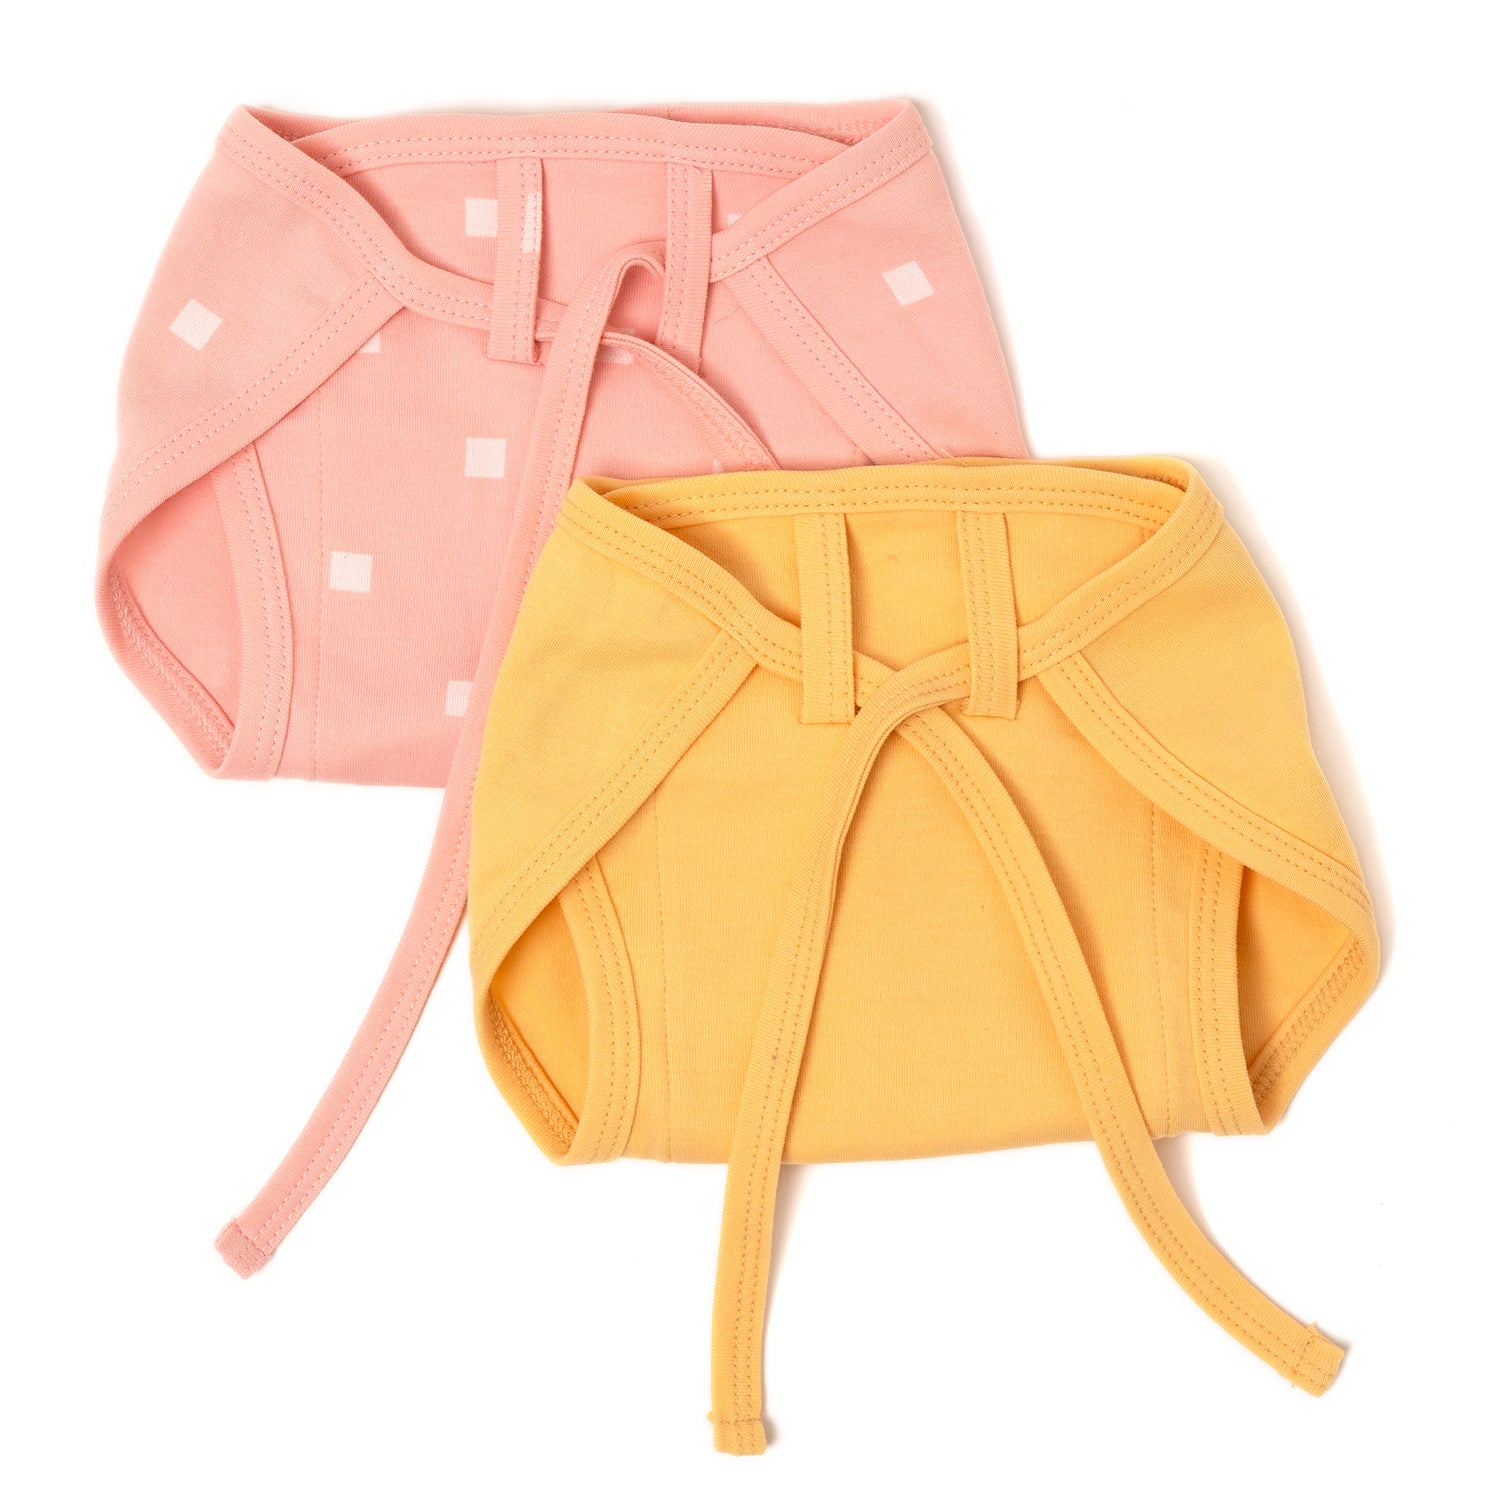 100% Cotton Jersey Nappies [Set - 3] Pack of 2 Solid Yellow & Pink Polka